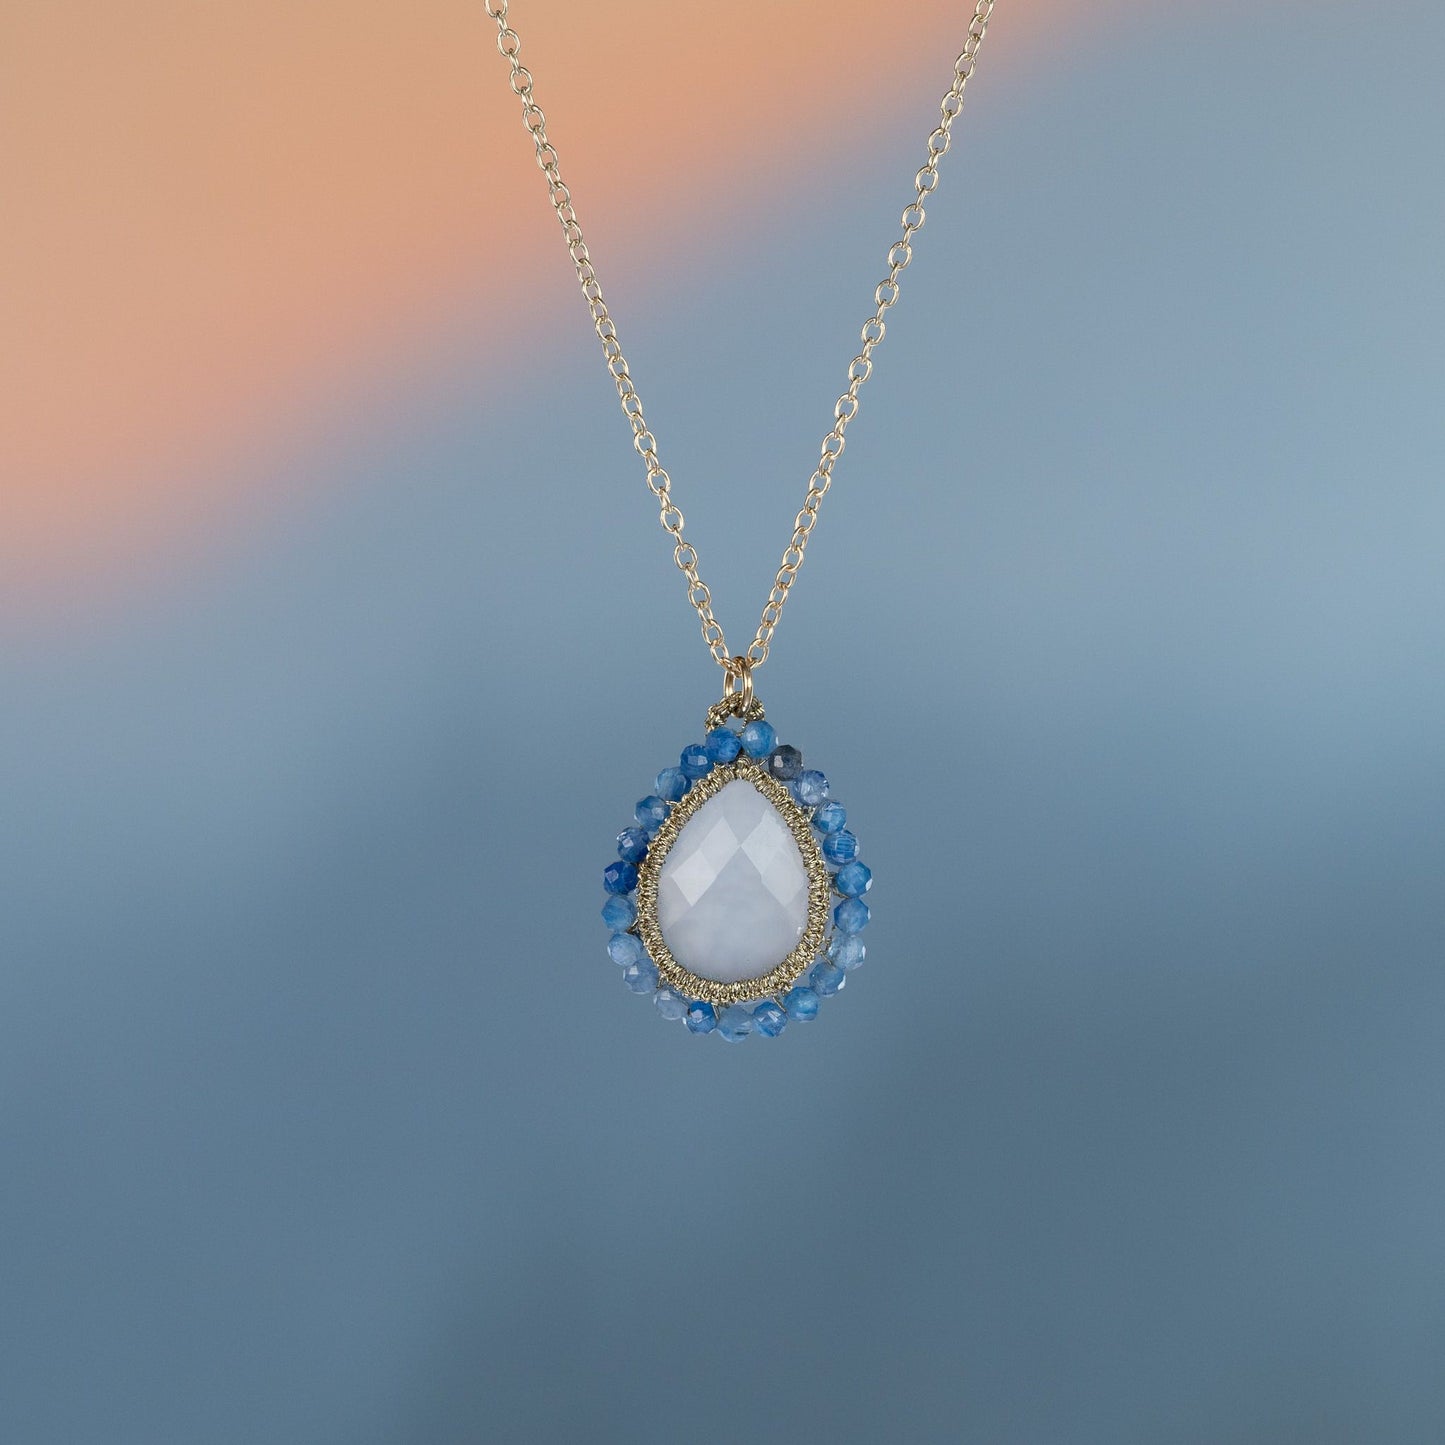 Bezel Gemstone Oval Pendant Necklace - Gold Plated Chain - Blue Chalcedony  (16-24